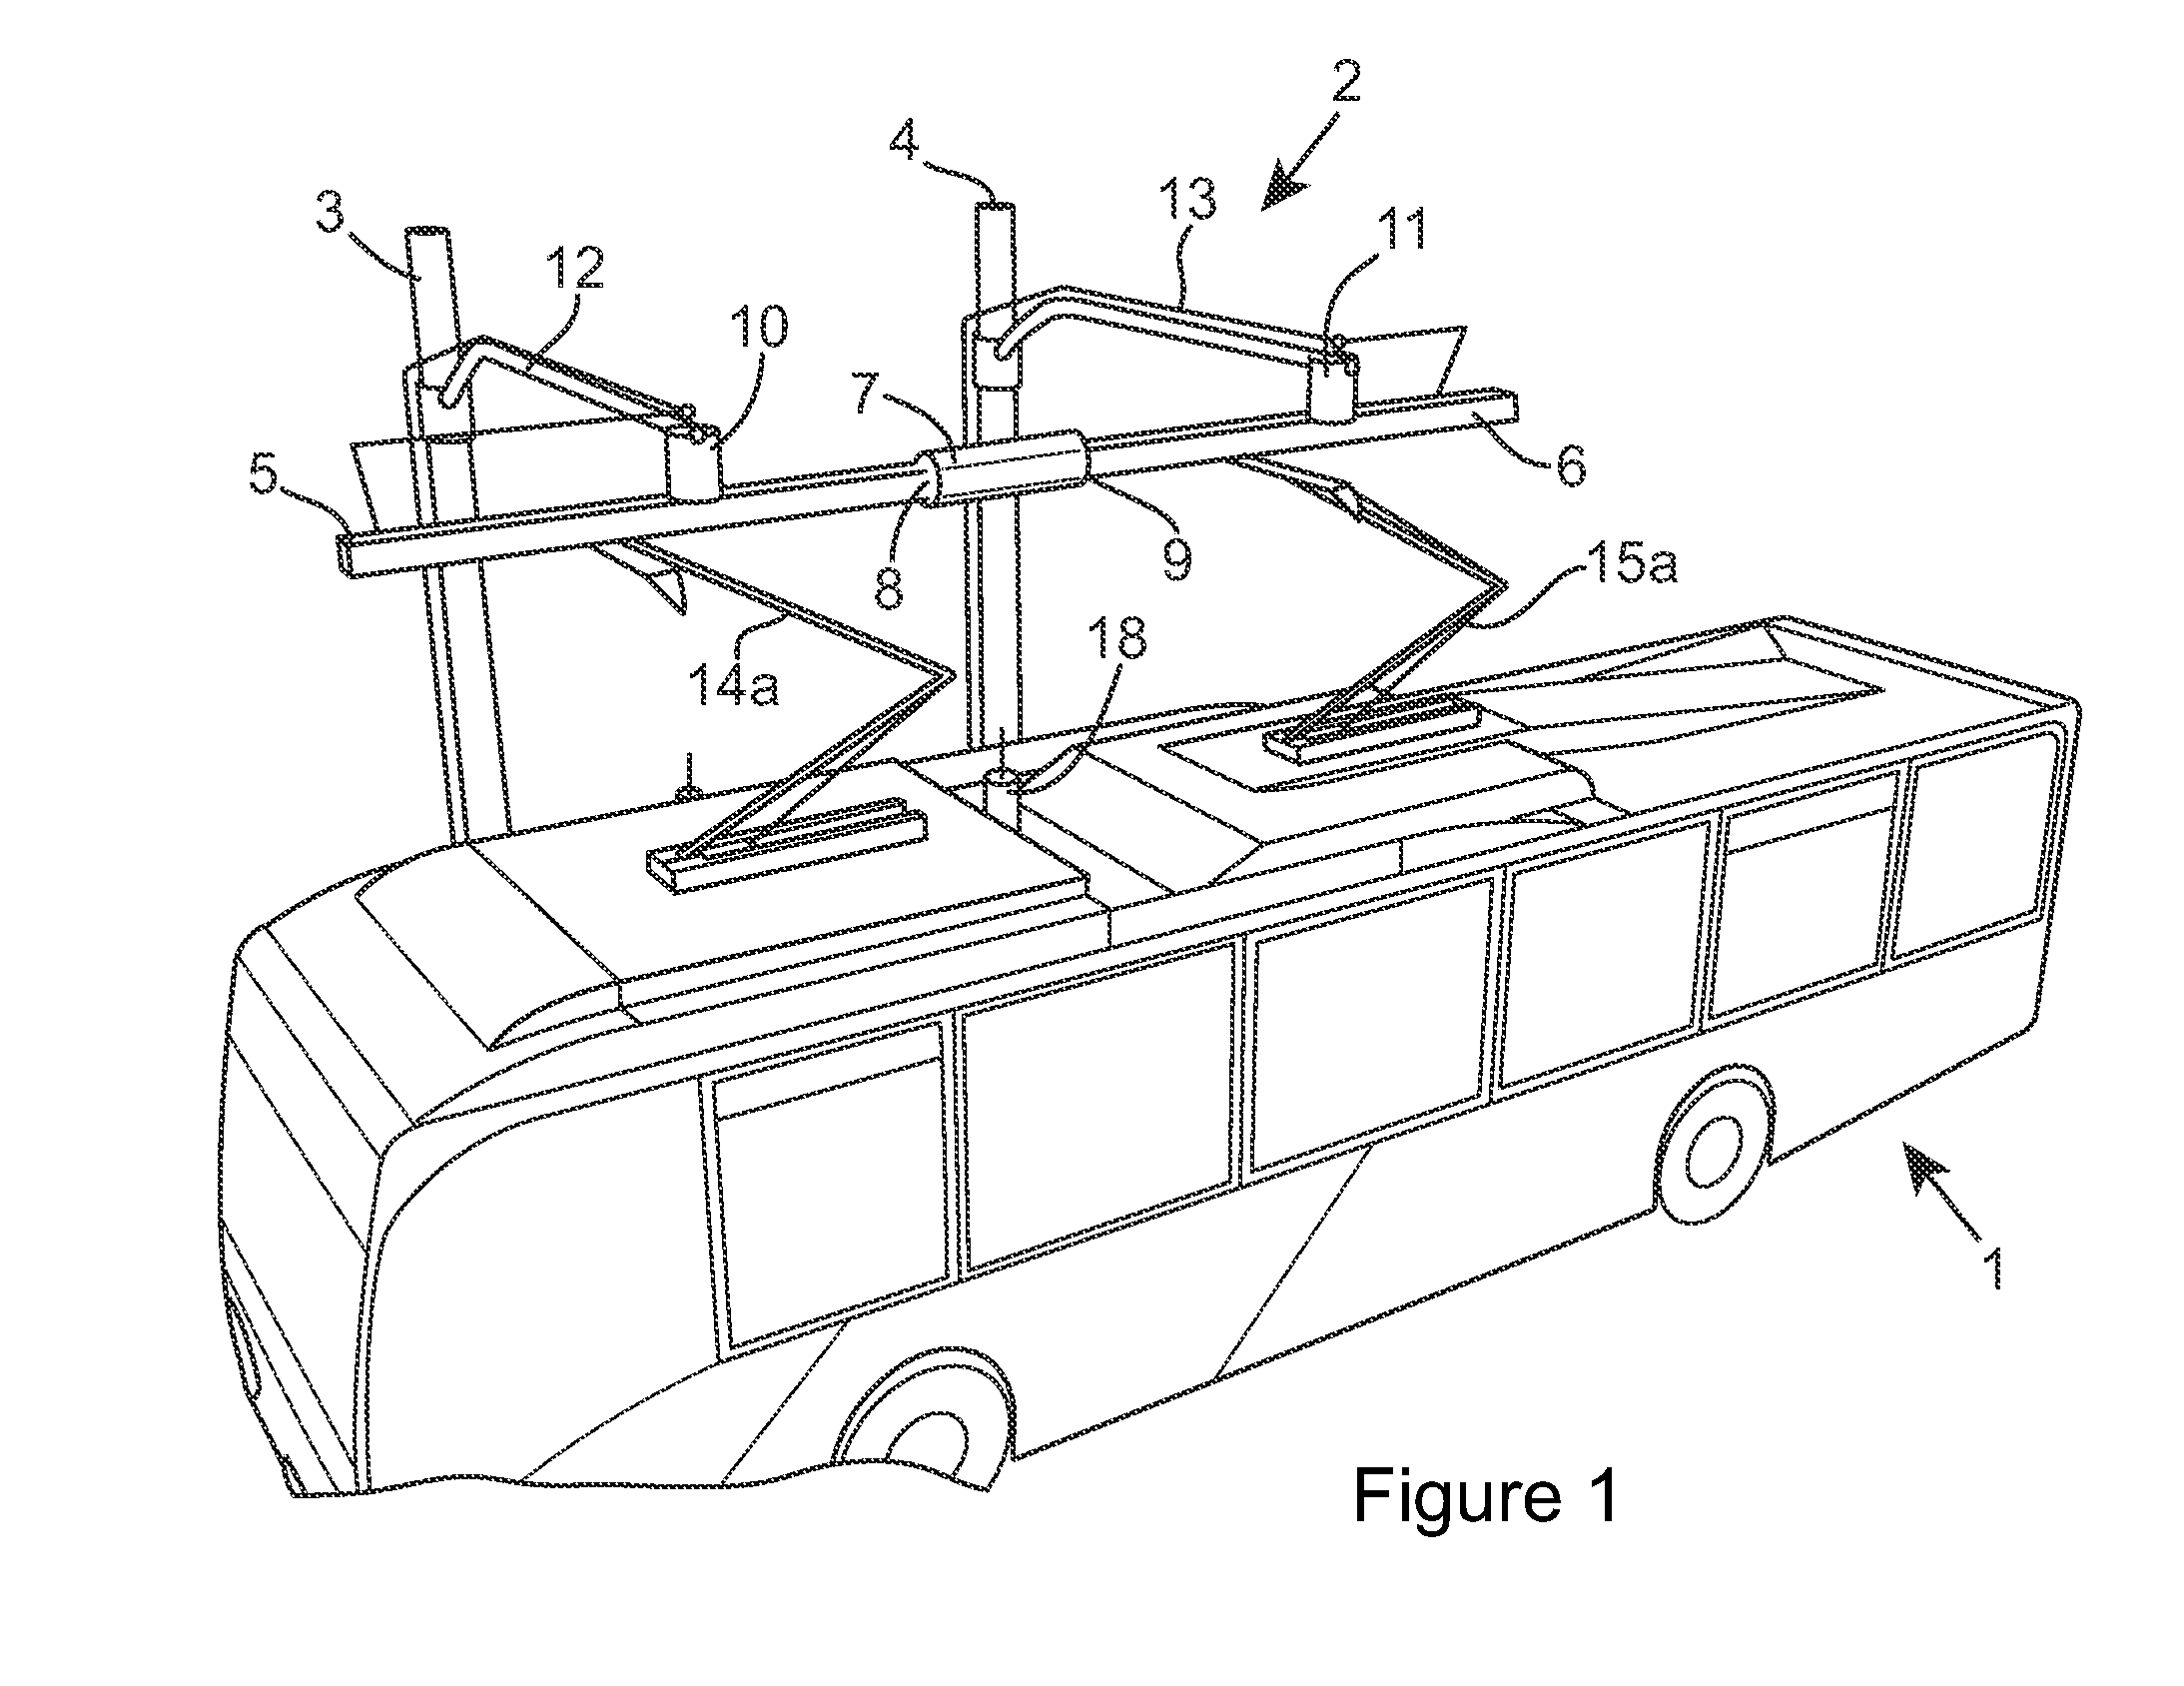 Electric vehicle charging station and charge receiving arrangement for a vehicle